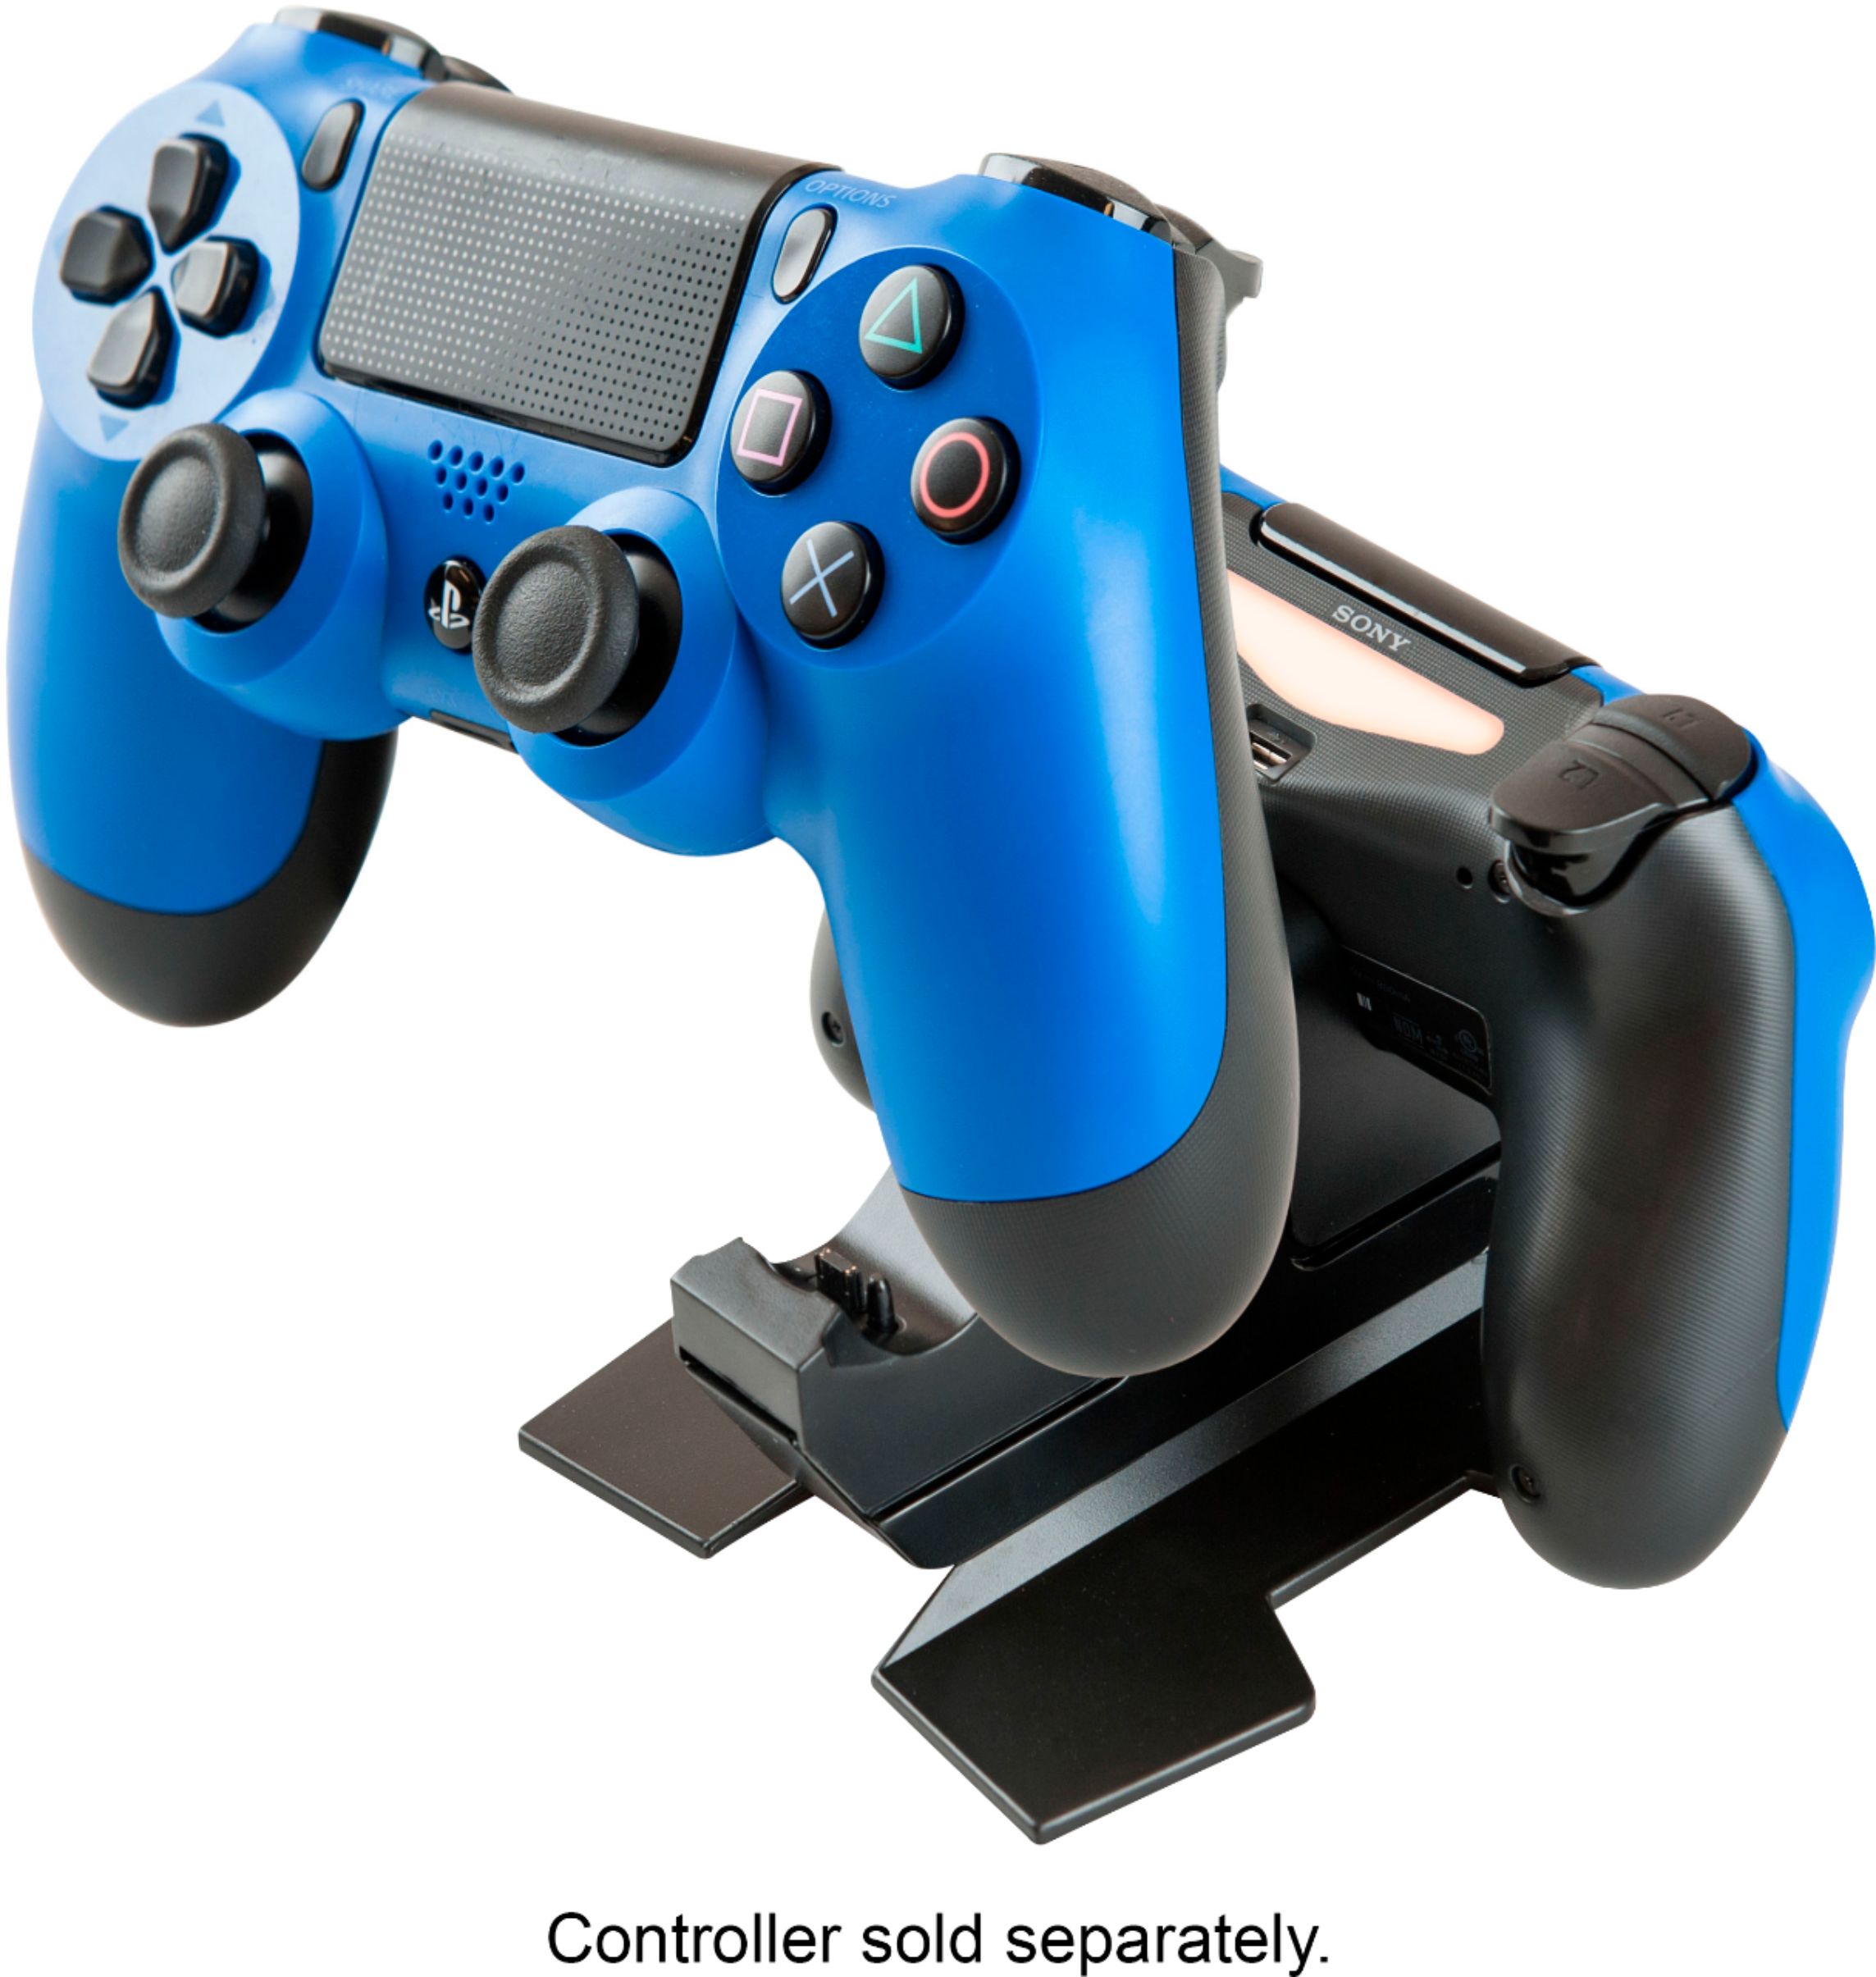 dualshock 4 phone charger